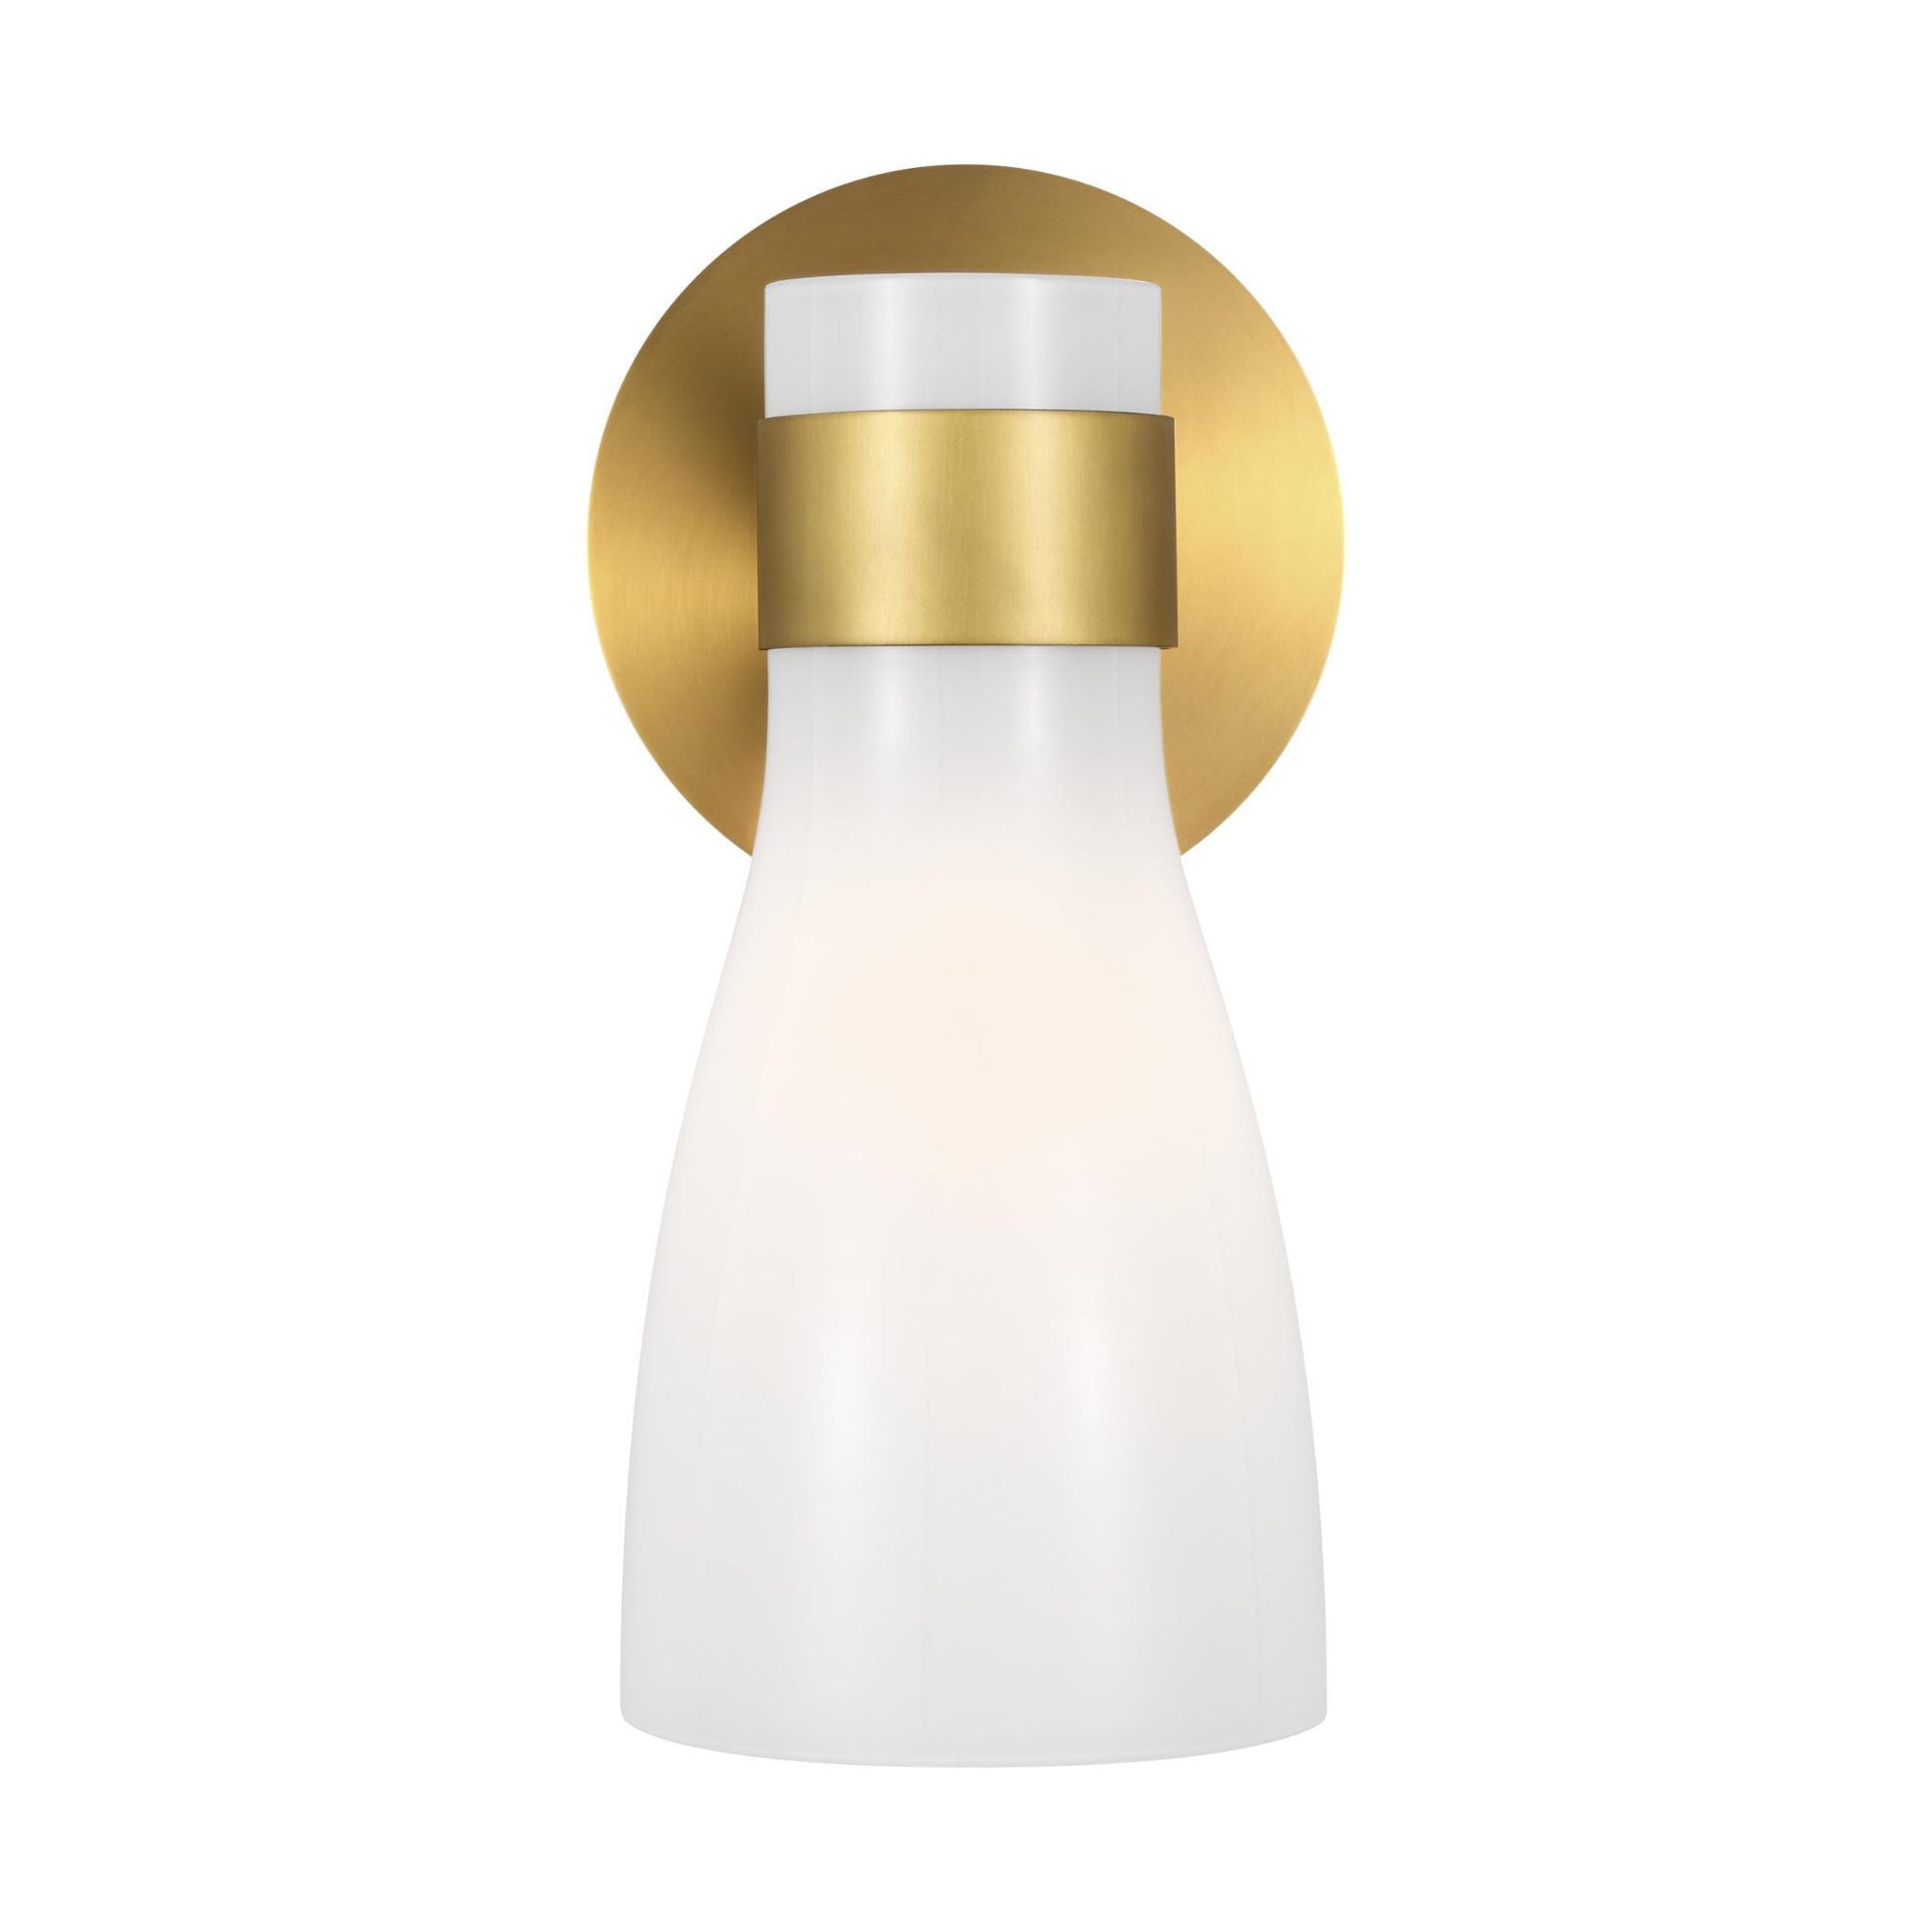 AERIN Moritz One Light Sconce in Burnished Brass with Milk White Glass